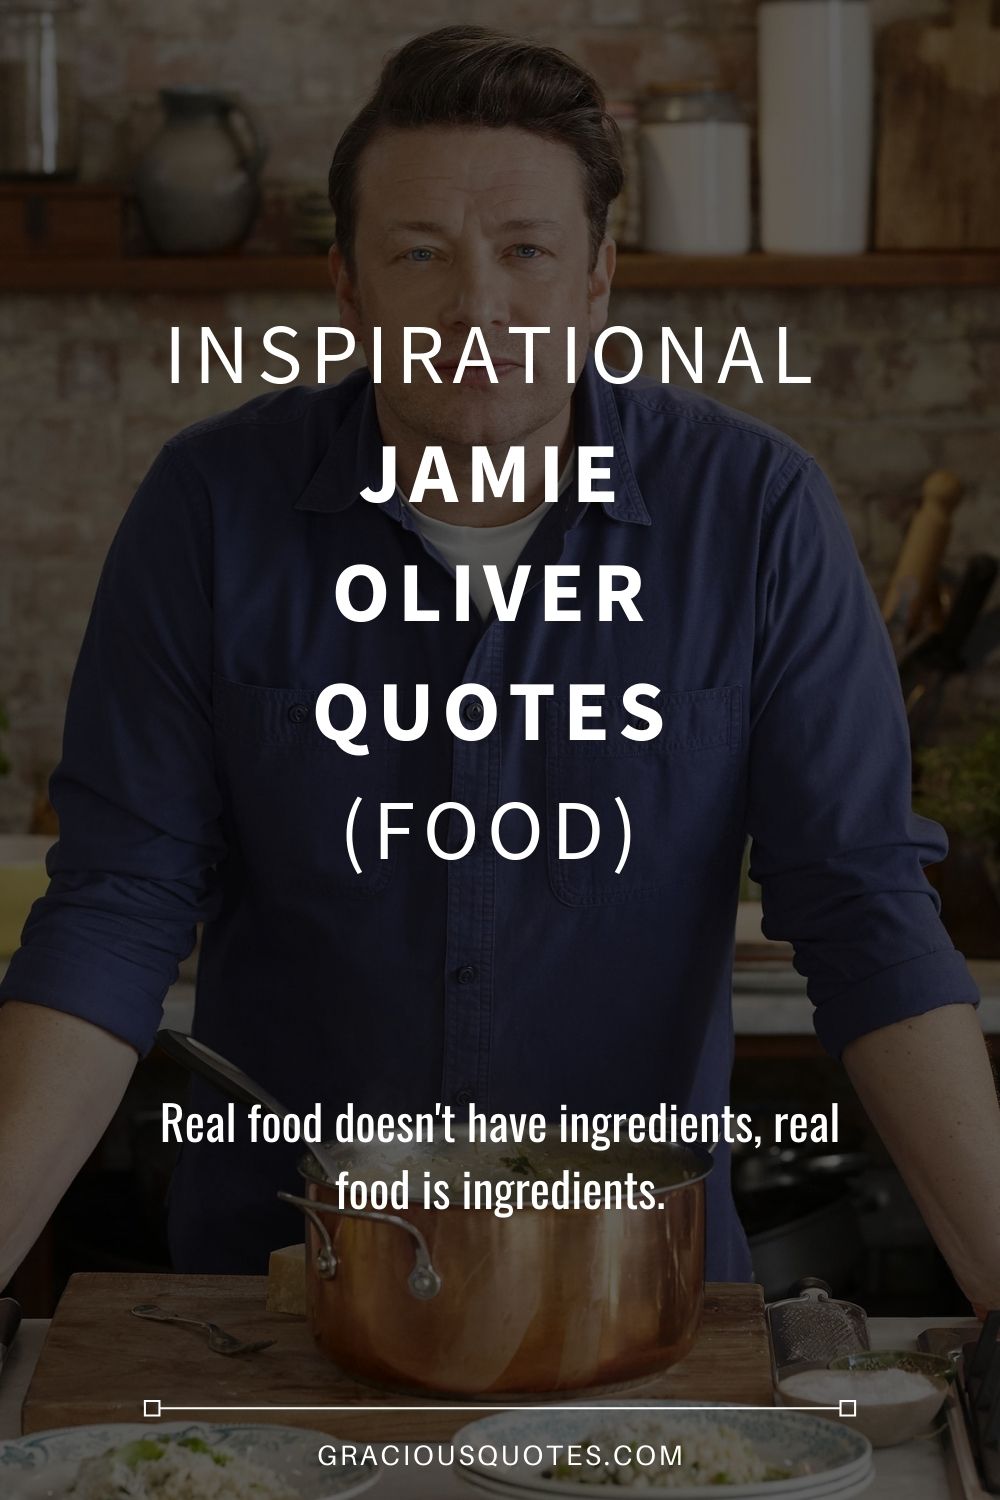 Inspirational Jamie Oliver Quotes (FOOD) - Gracious Quotes